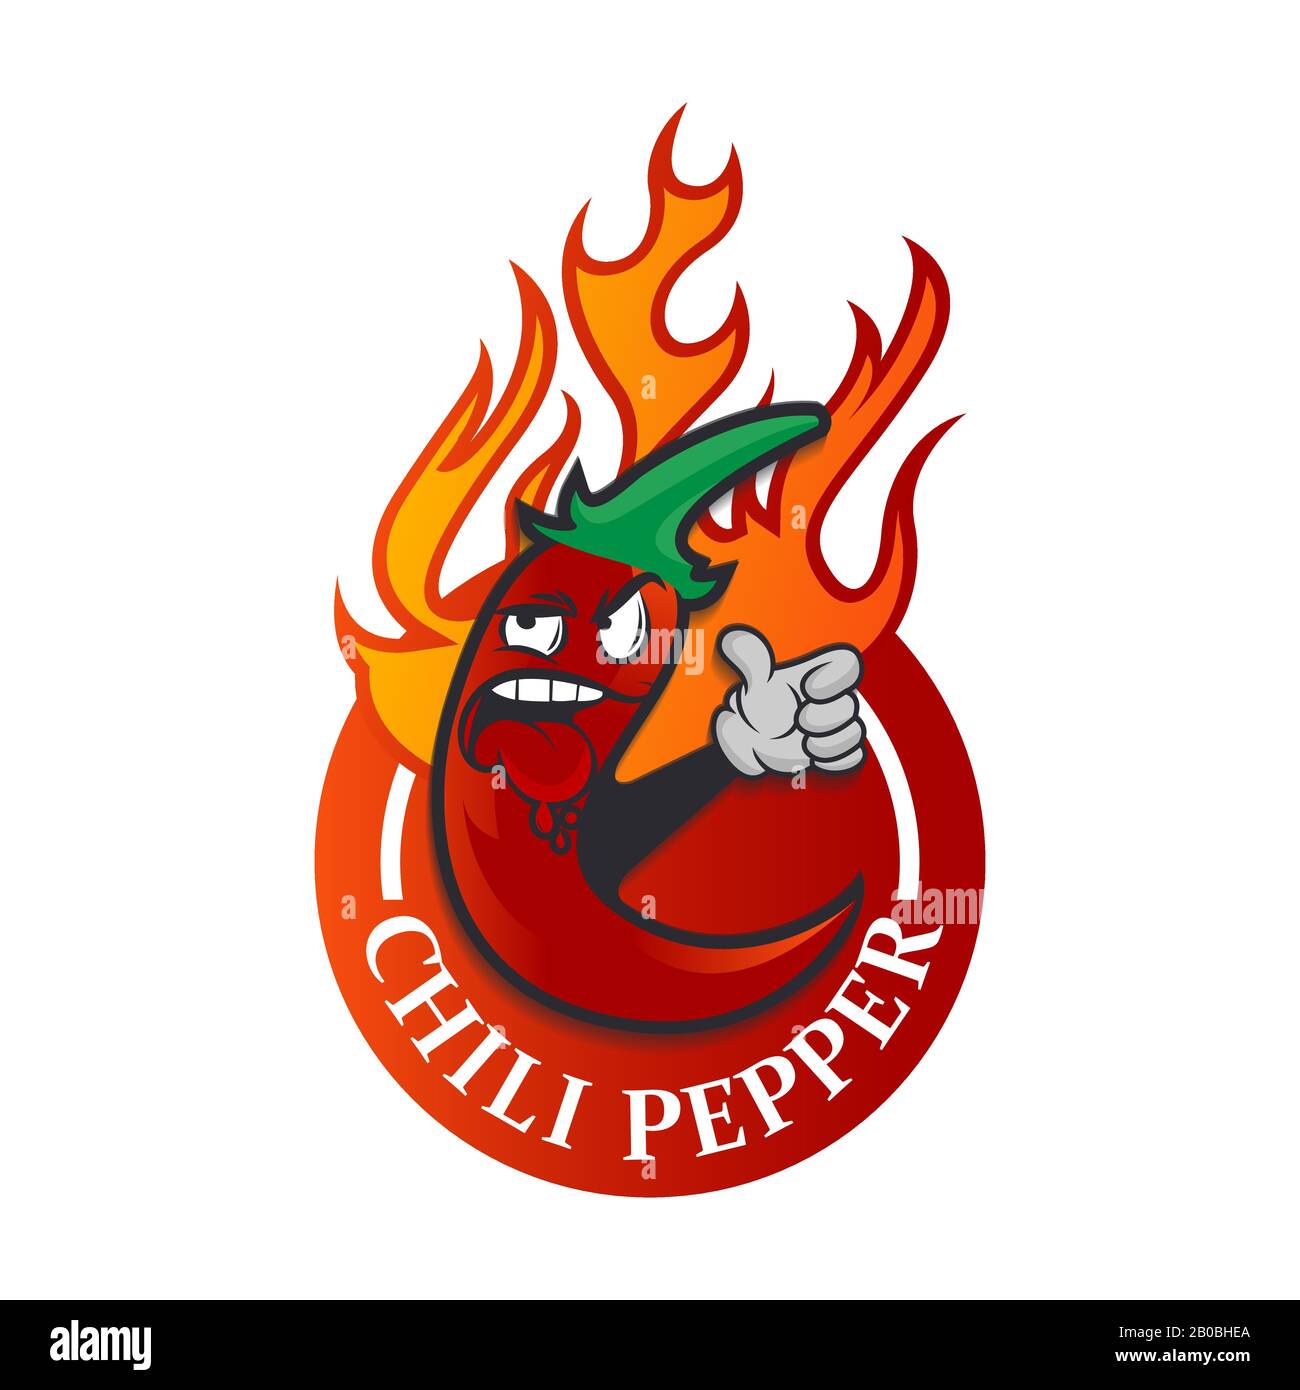 Chili Pepper Cartoon Mascot Logo template. Mexican Fast food logotype template. Isolated vector illustration. Stock Vector